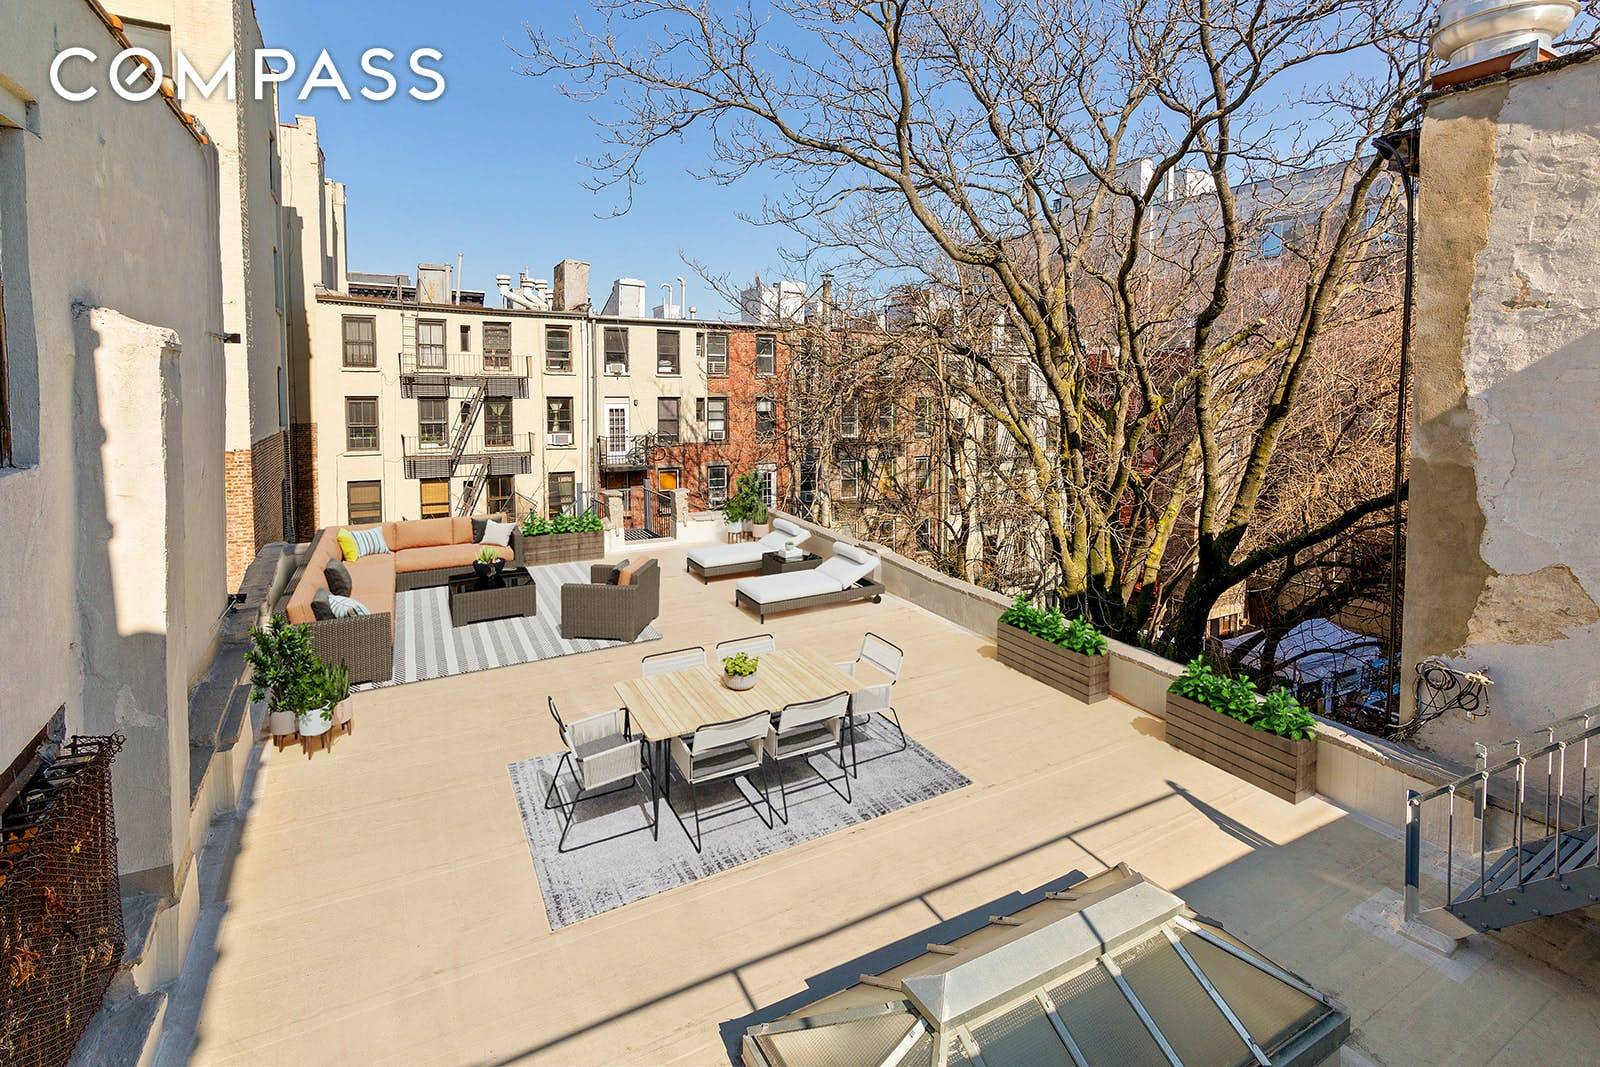 Glorious sunlight invites you inside this spacious three bedrooms, two bathroom apartment located in a beautiful former synagogue in the heart of the East Village.